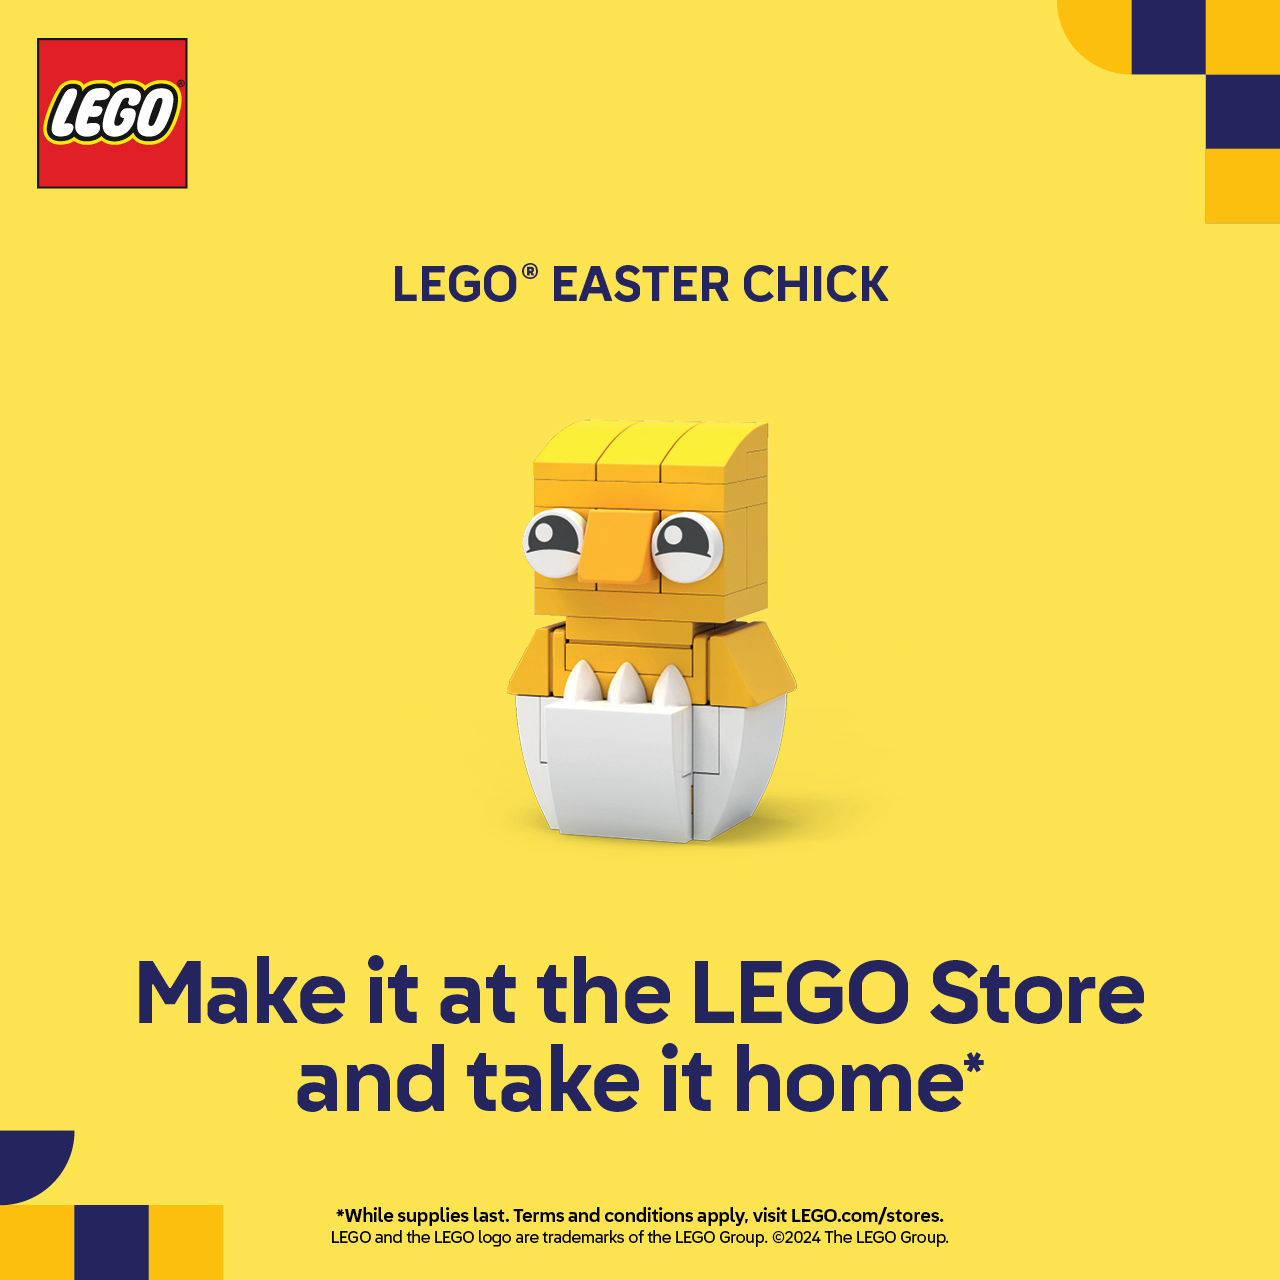 LEGO Campaign 36 Build a LEGO® Easter Chick and take it home with you EN 1280x1280 1